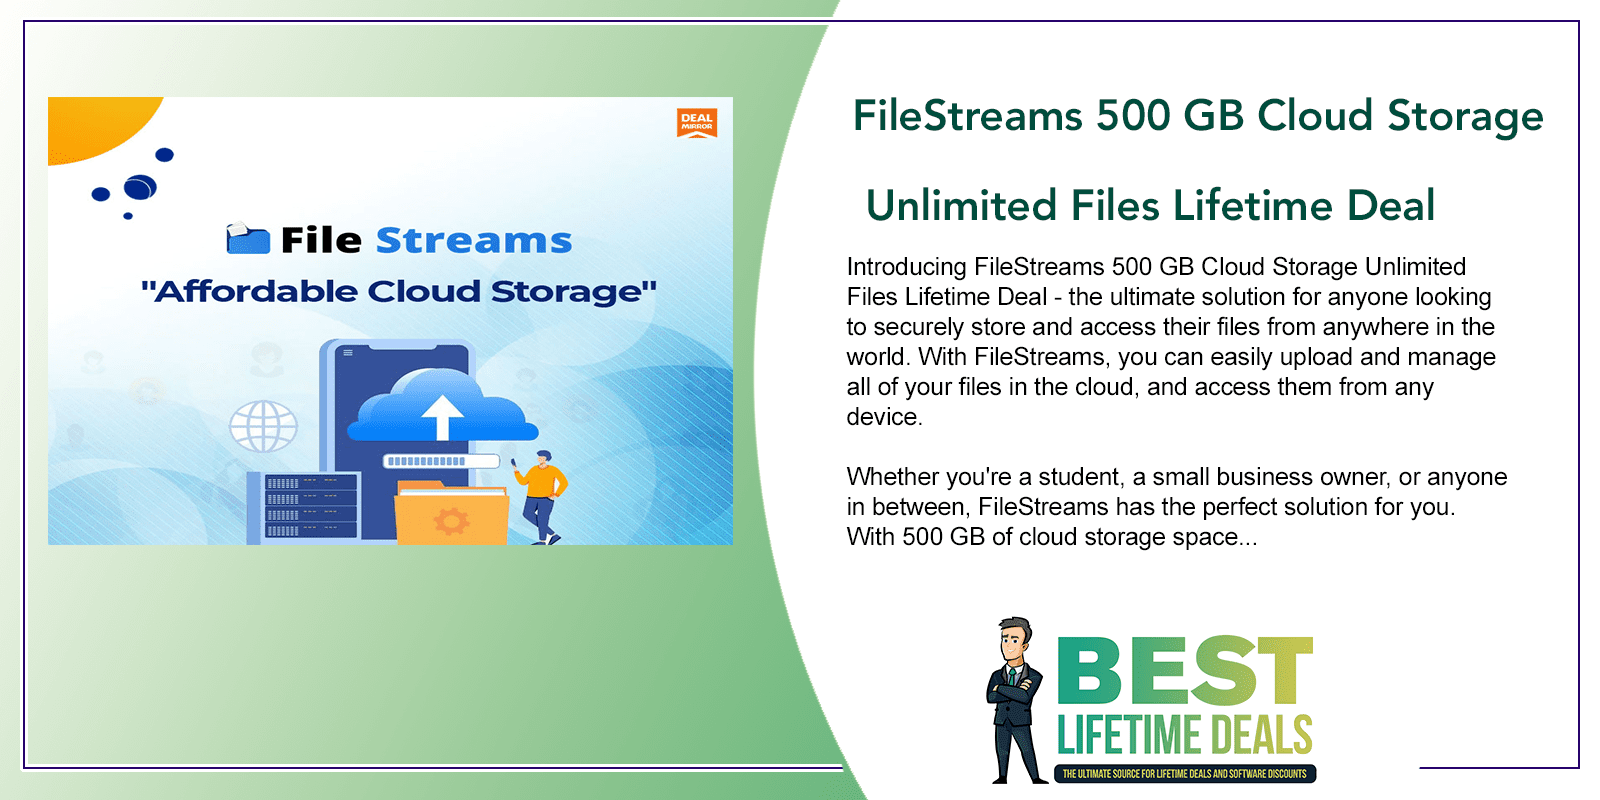 FileStreams 500 GB Cloud Storage Unlimited Files Lifetime Deal Featured Image